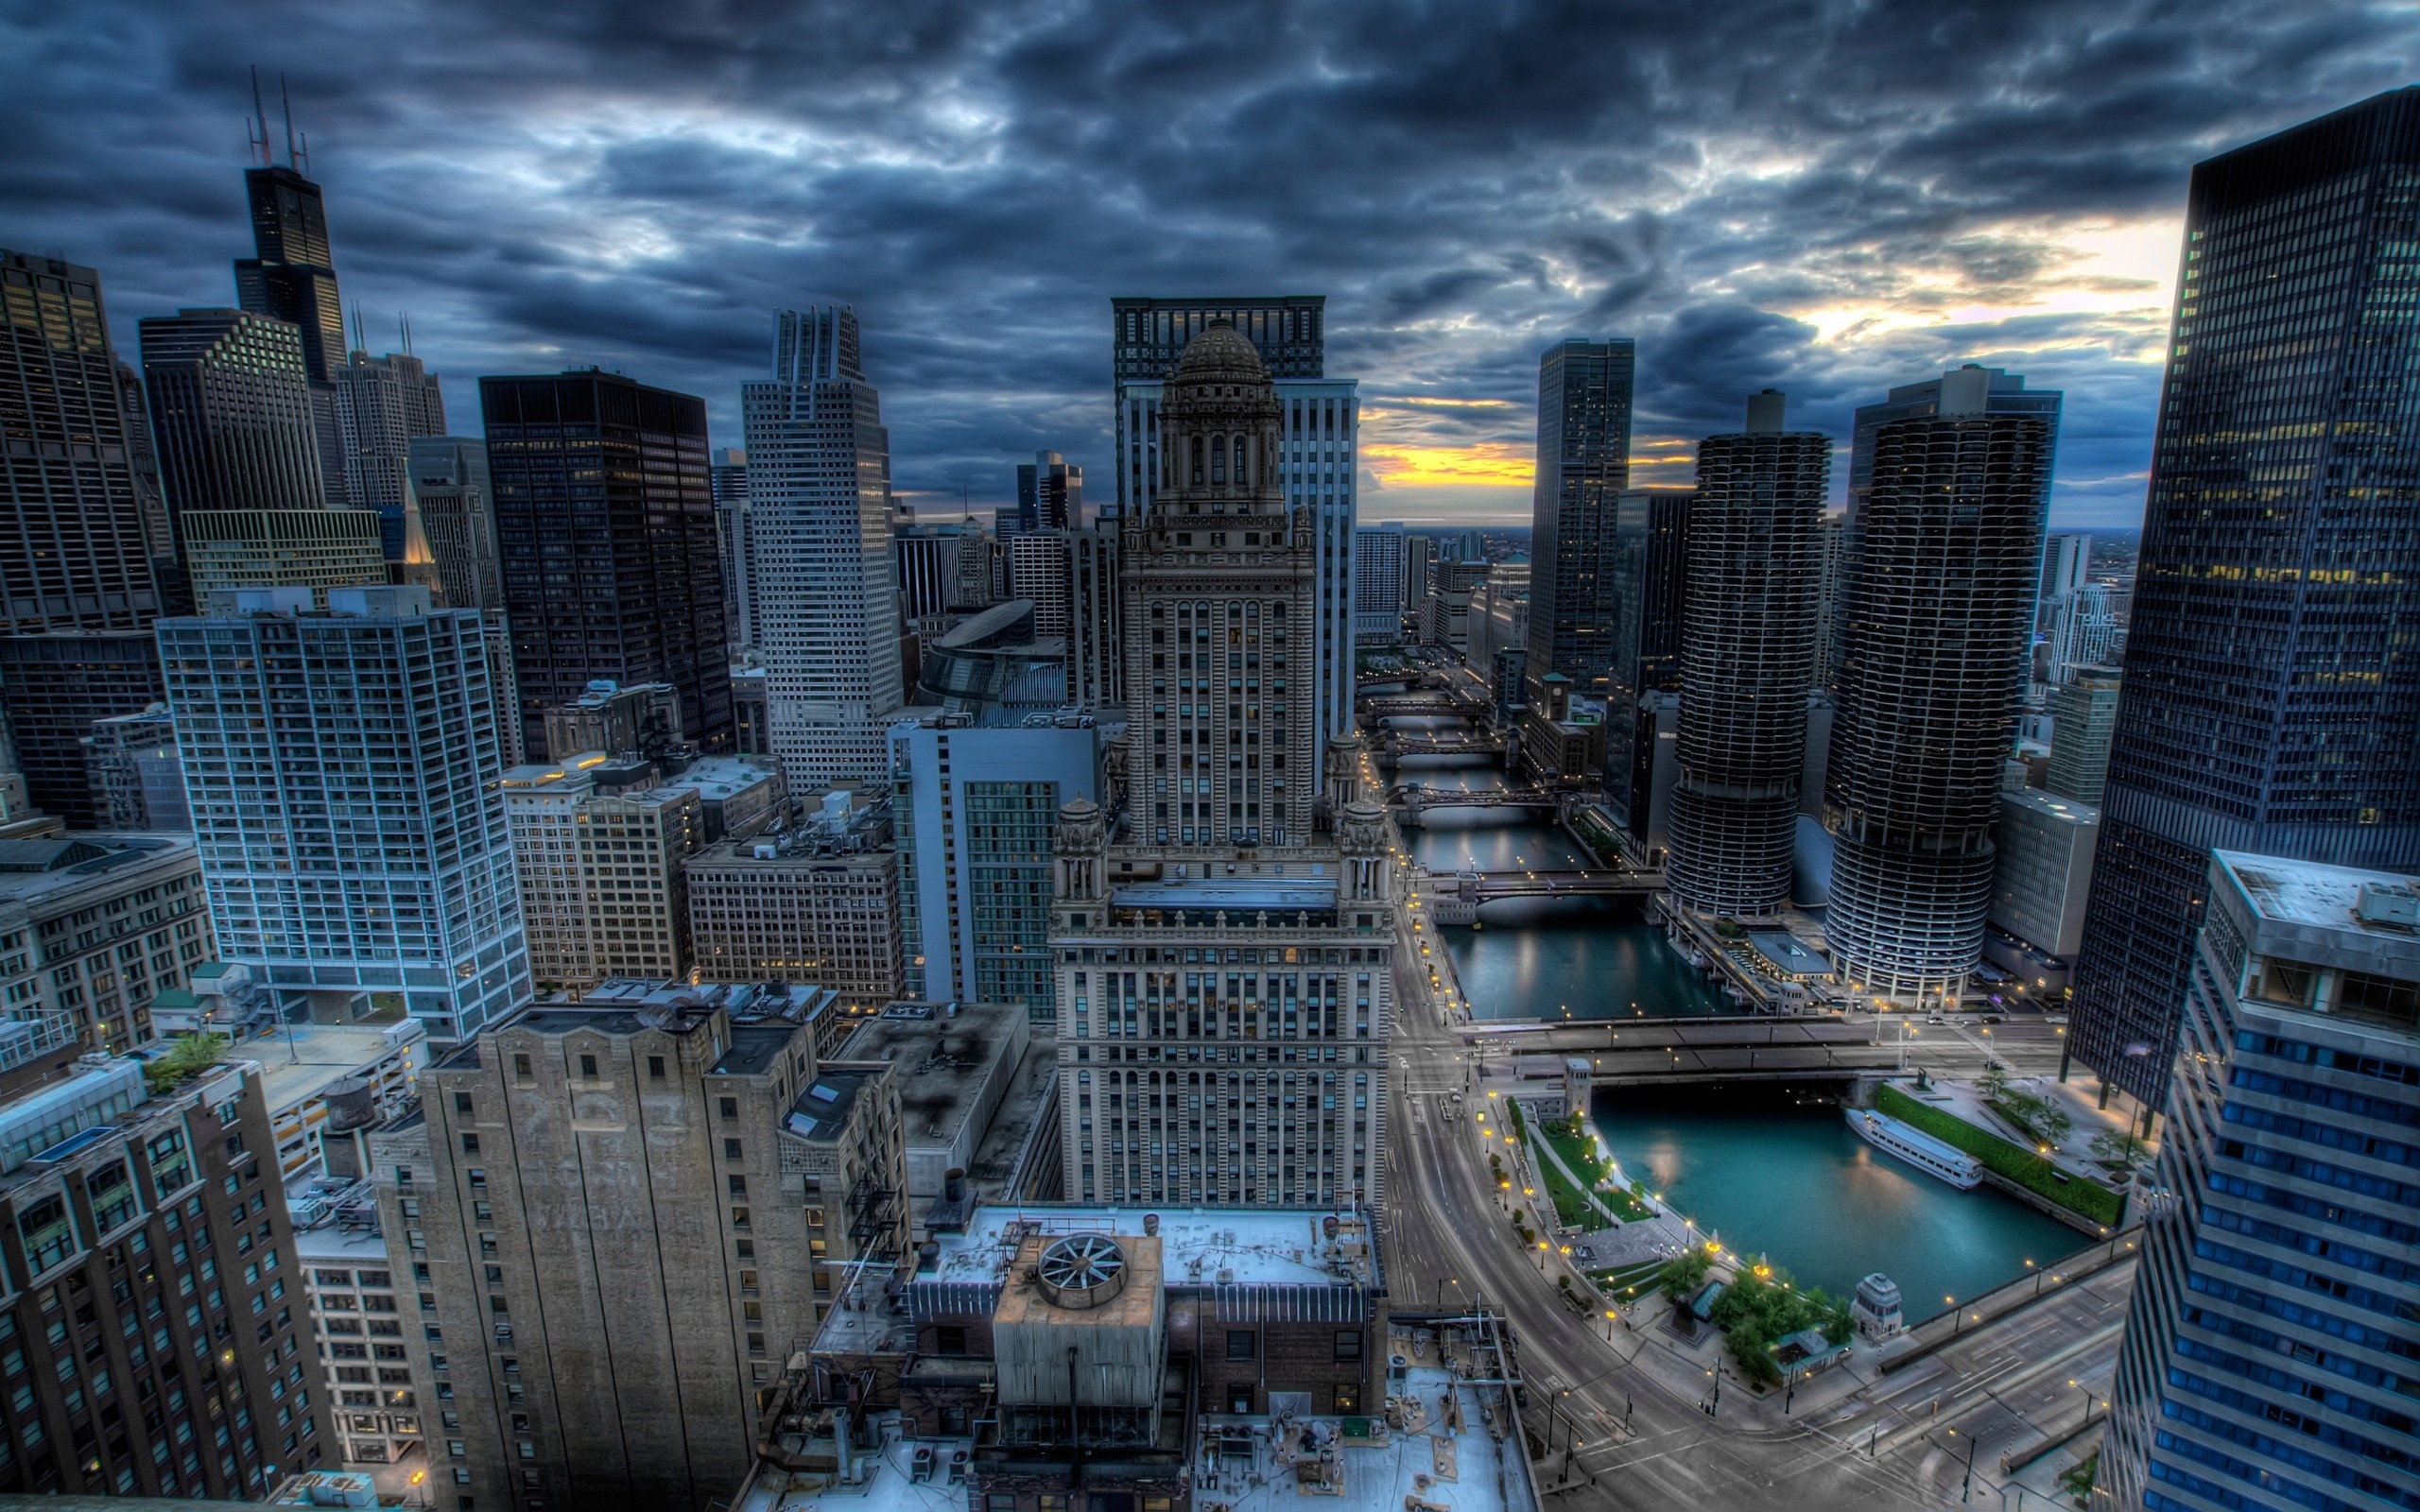 Chicago: The city is known for its cuisine, particularly its deep-dish pizza and hot dogs. 2560x1600 HD Background.